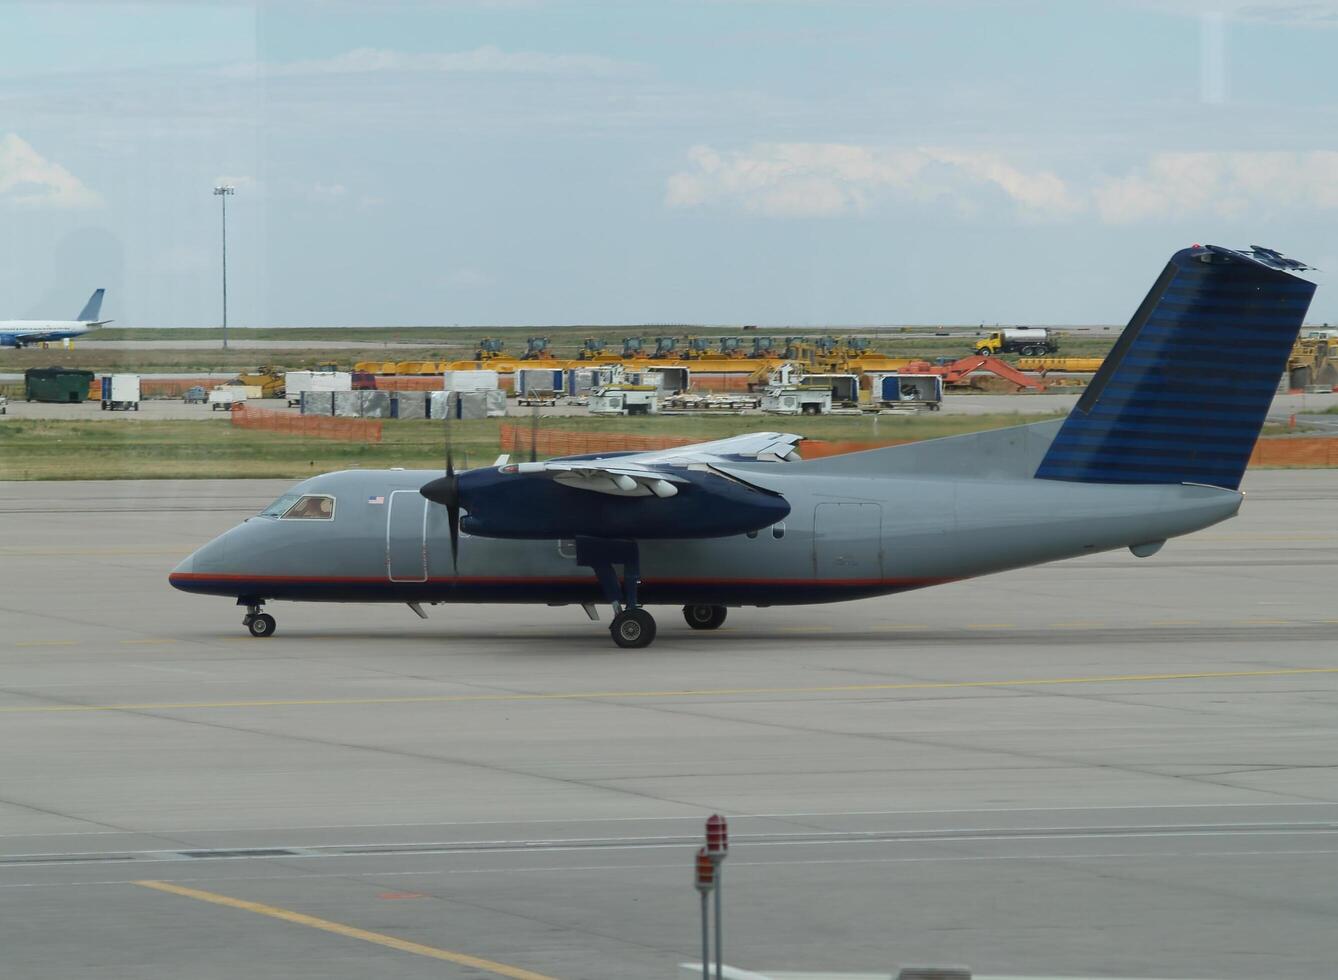 Boston, MA, 2008 - Two-Propeller Commercial Aircraft Heading Out For Takeoff photo